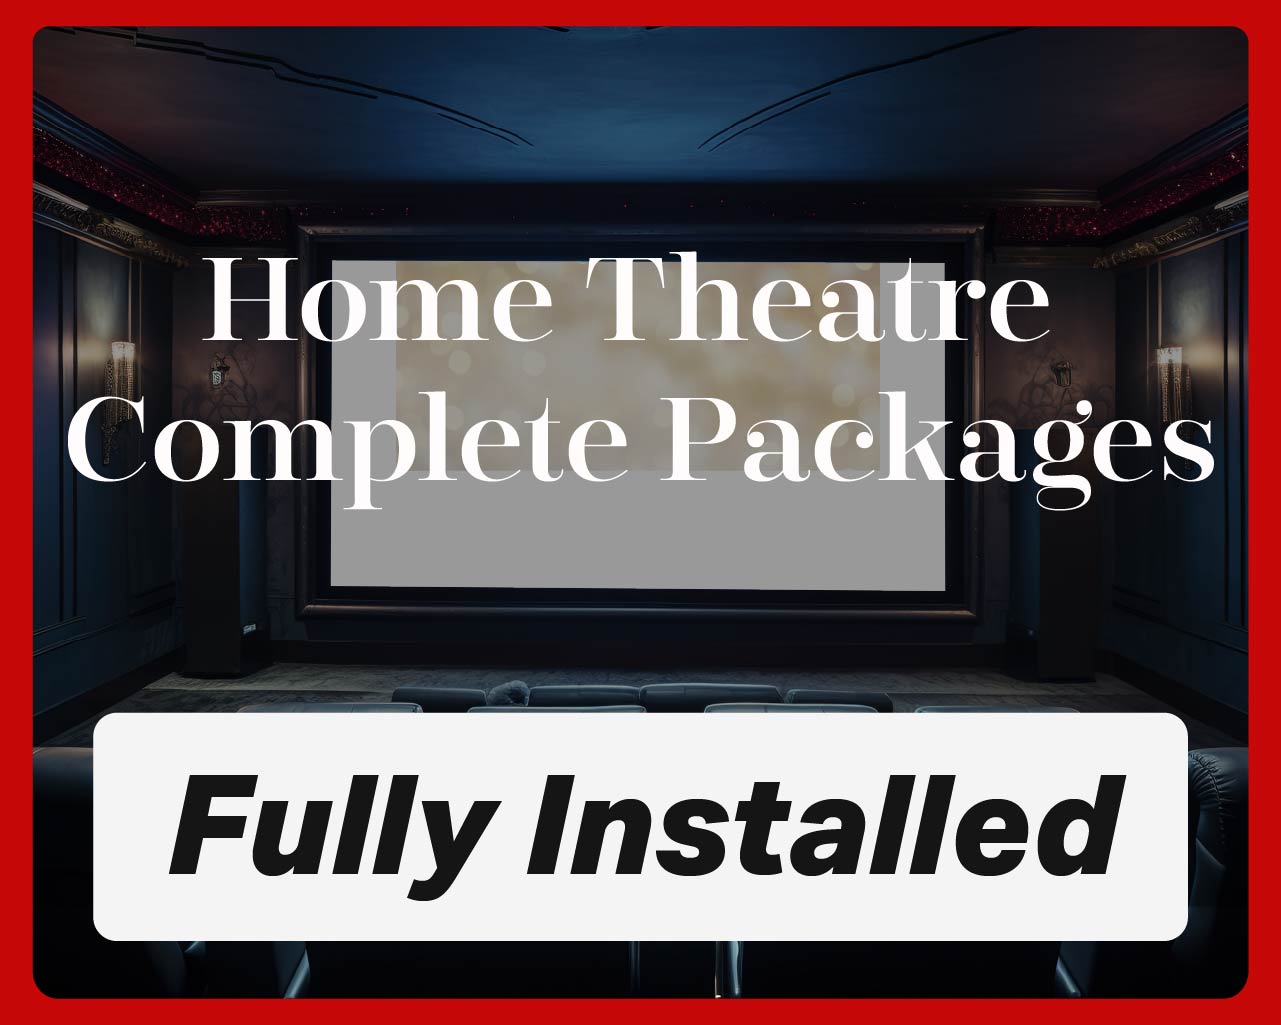 Home Theatre Complete Packages